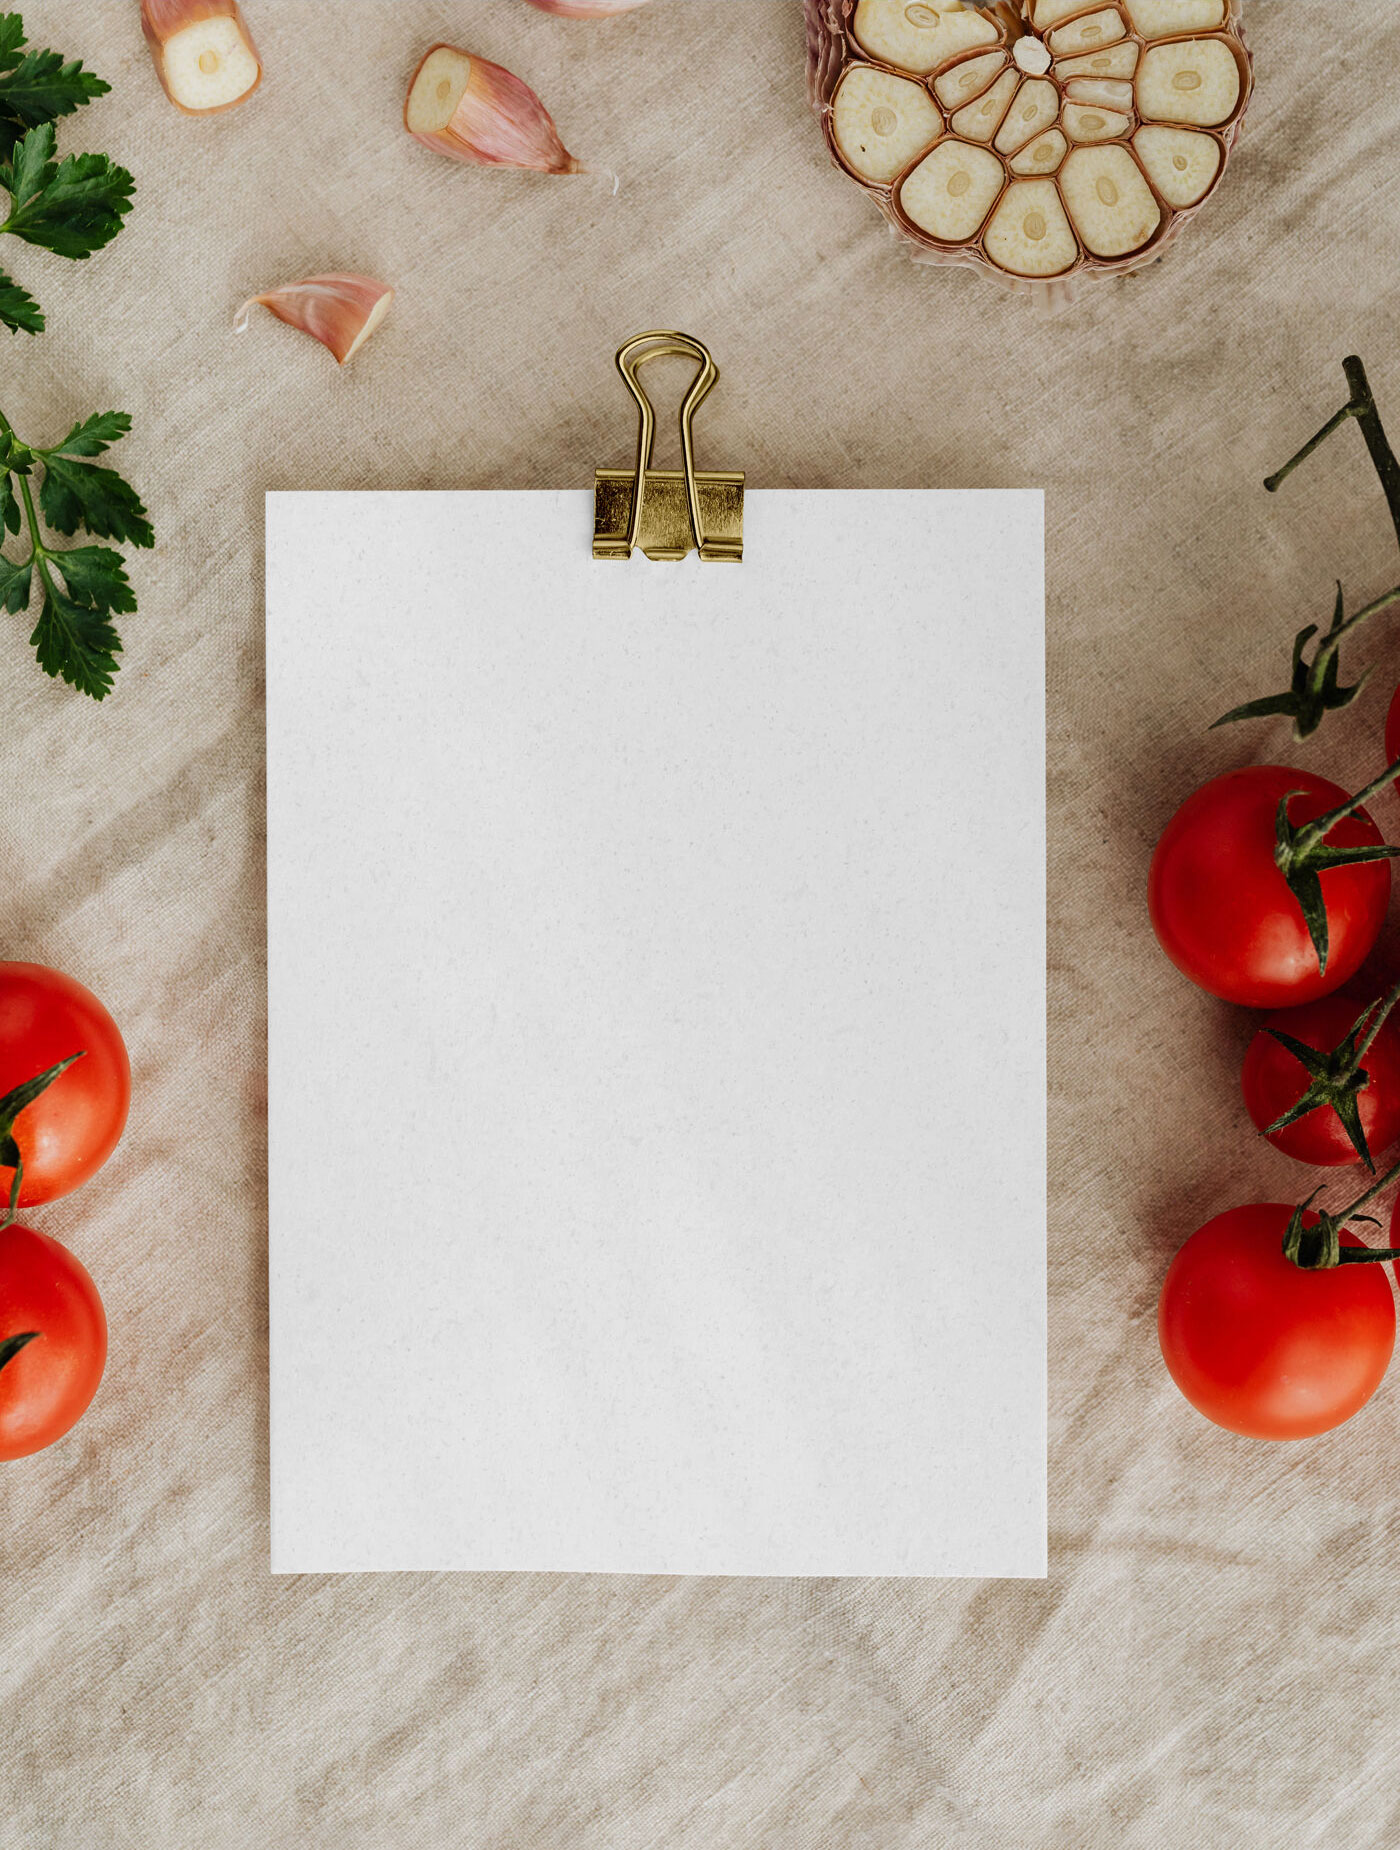 Simple Card on the Kitchen Table with Vegetables Mockup FREE PSD